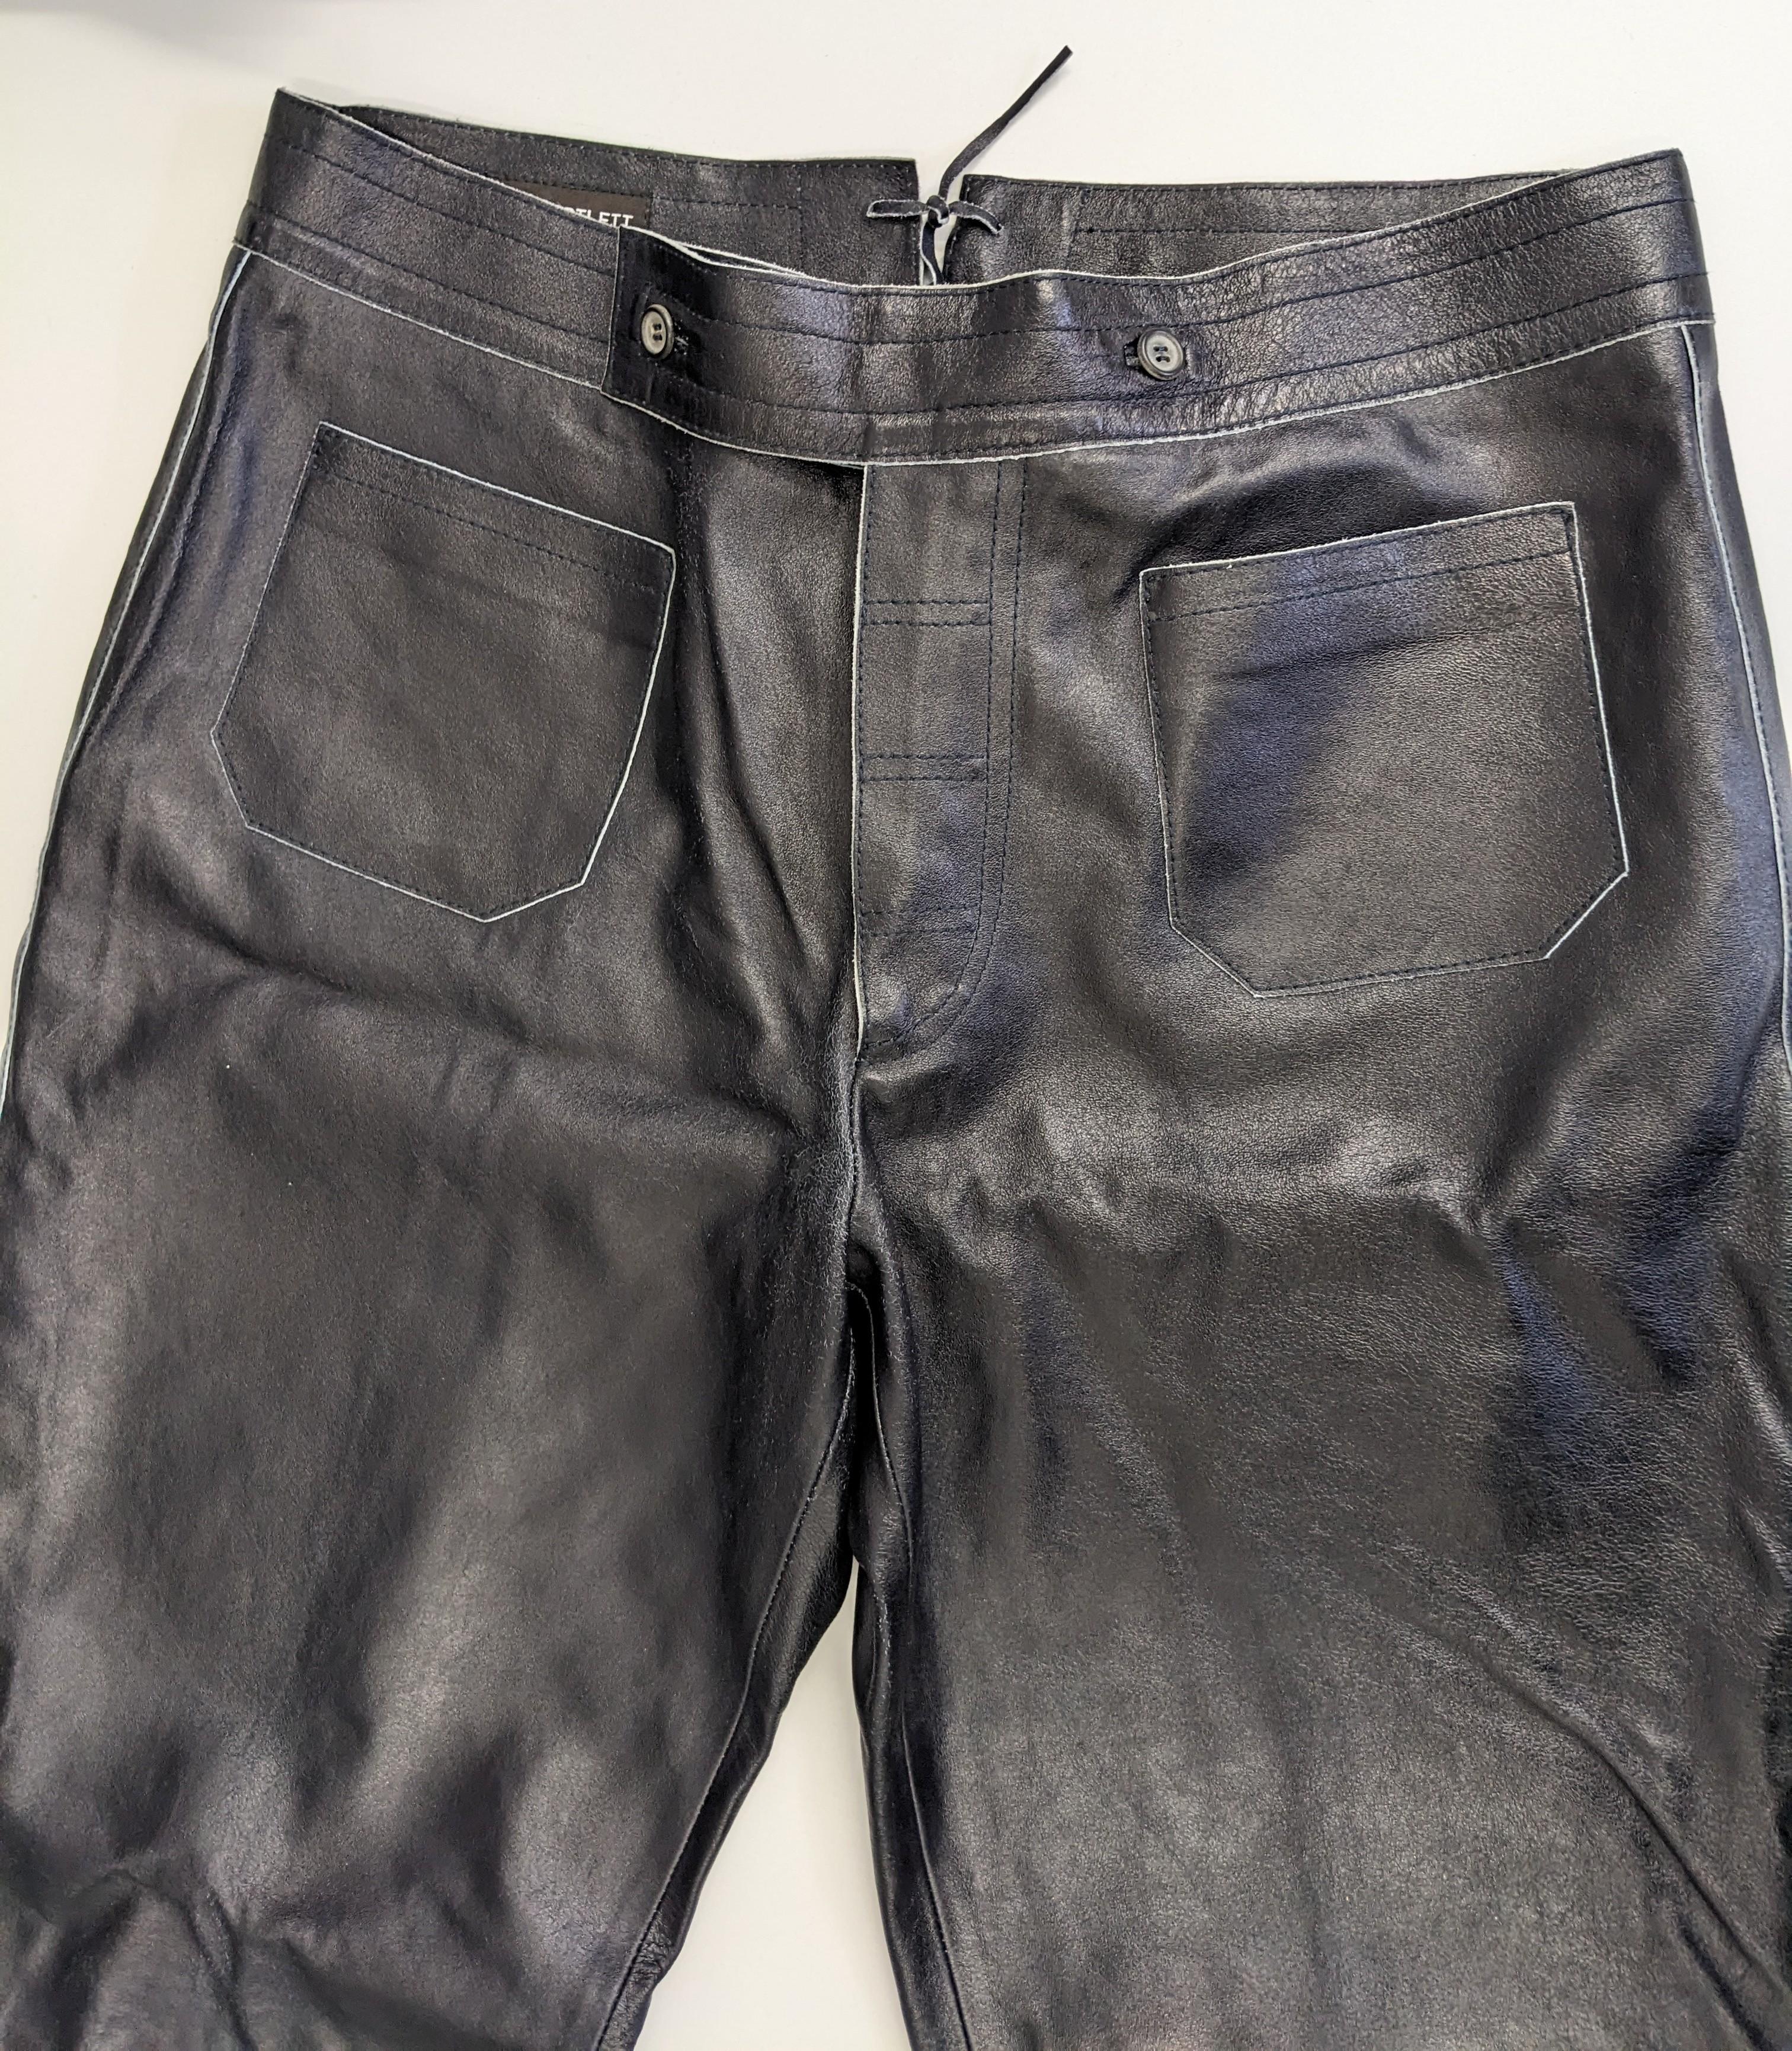 Cool John Bartlett Mens Leather Jeans from the early 2000's. Inky eggplant blue black heavy leather is styled as 1970's jeans with low waist, patch pockets and wide legs. 
Leather is coated and is white underneath, these pants are design to crease,